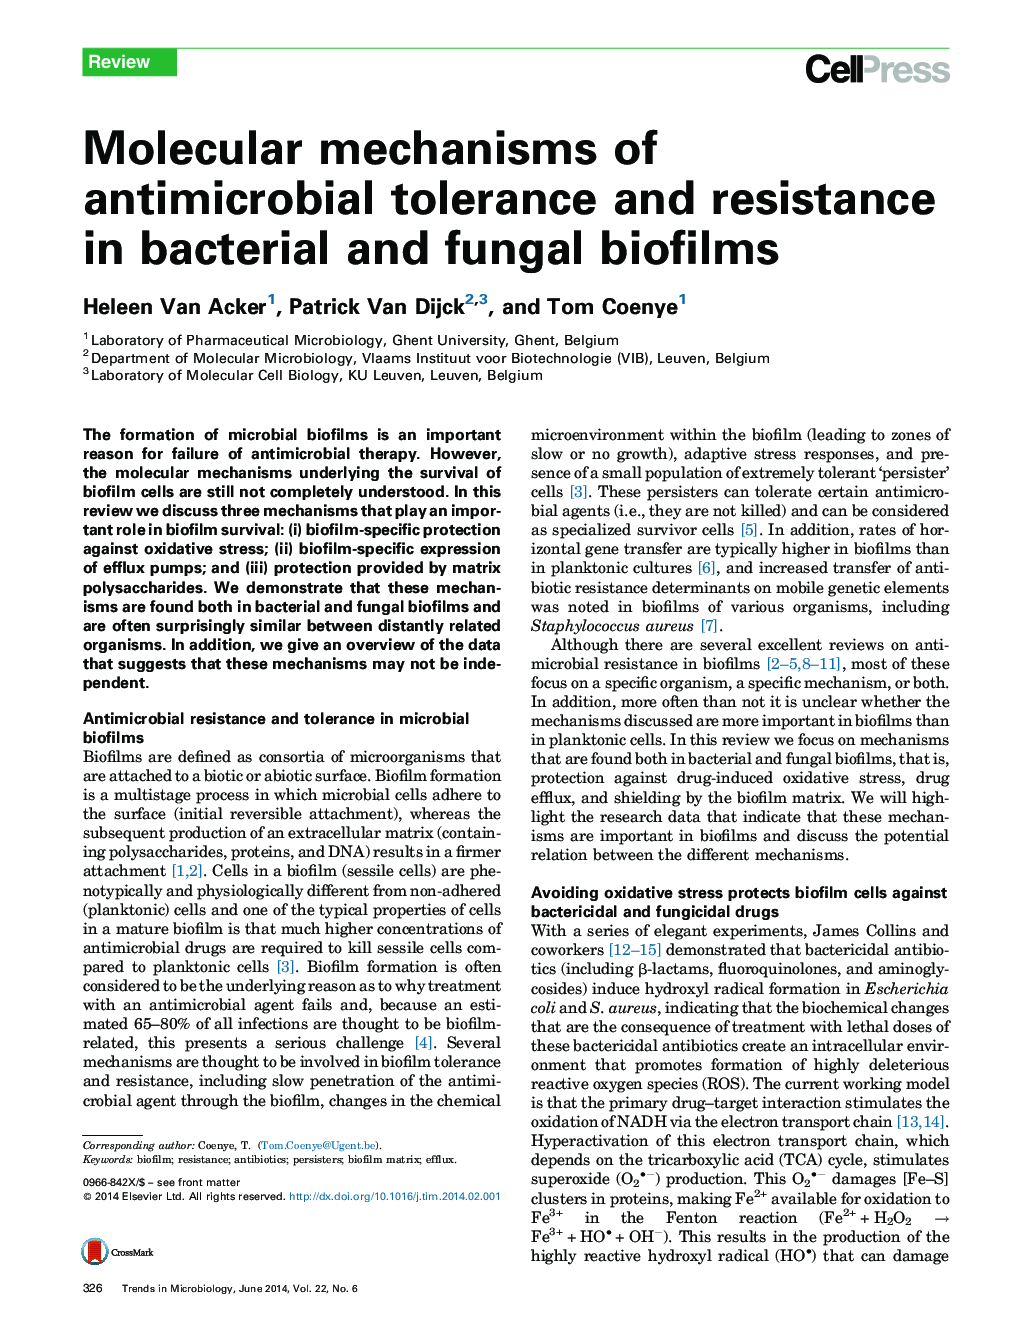 Molecular mechanisms of antimicrobial tolerance and resistance in bacterial and fungal biofilms